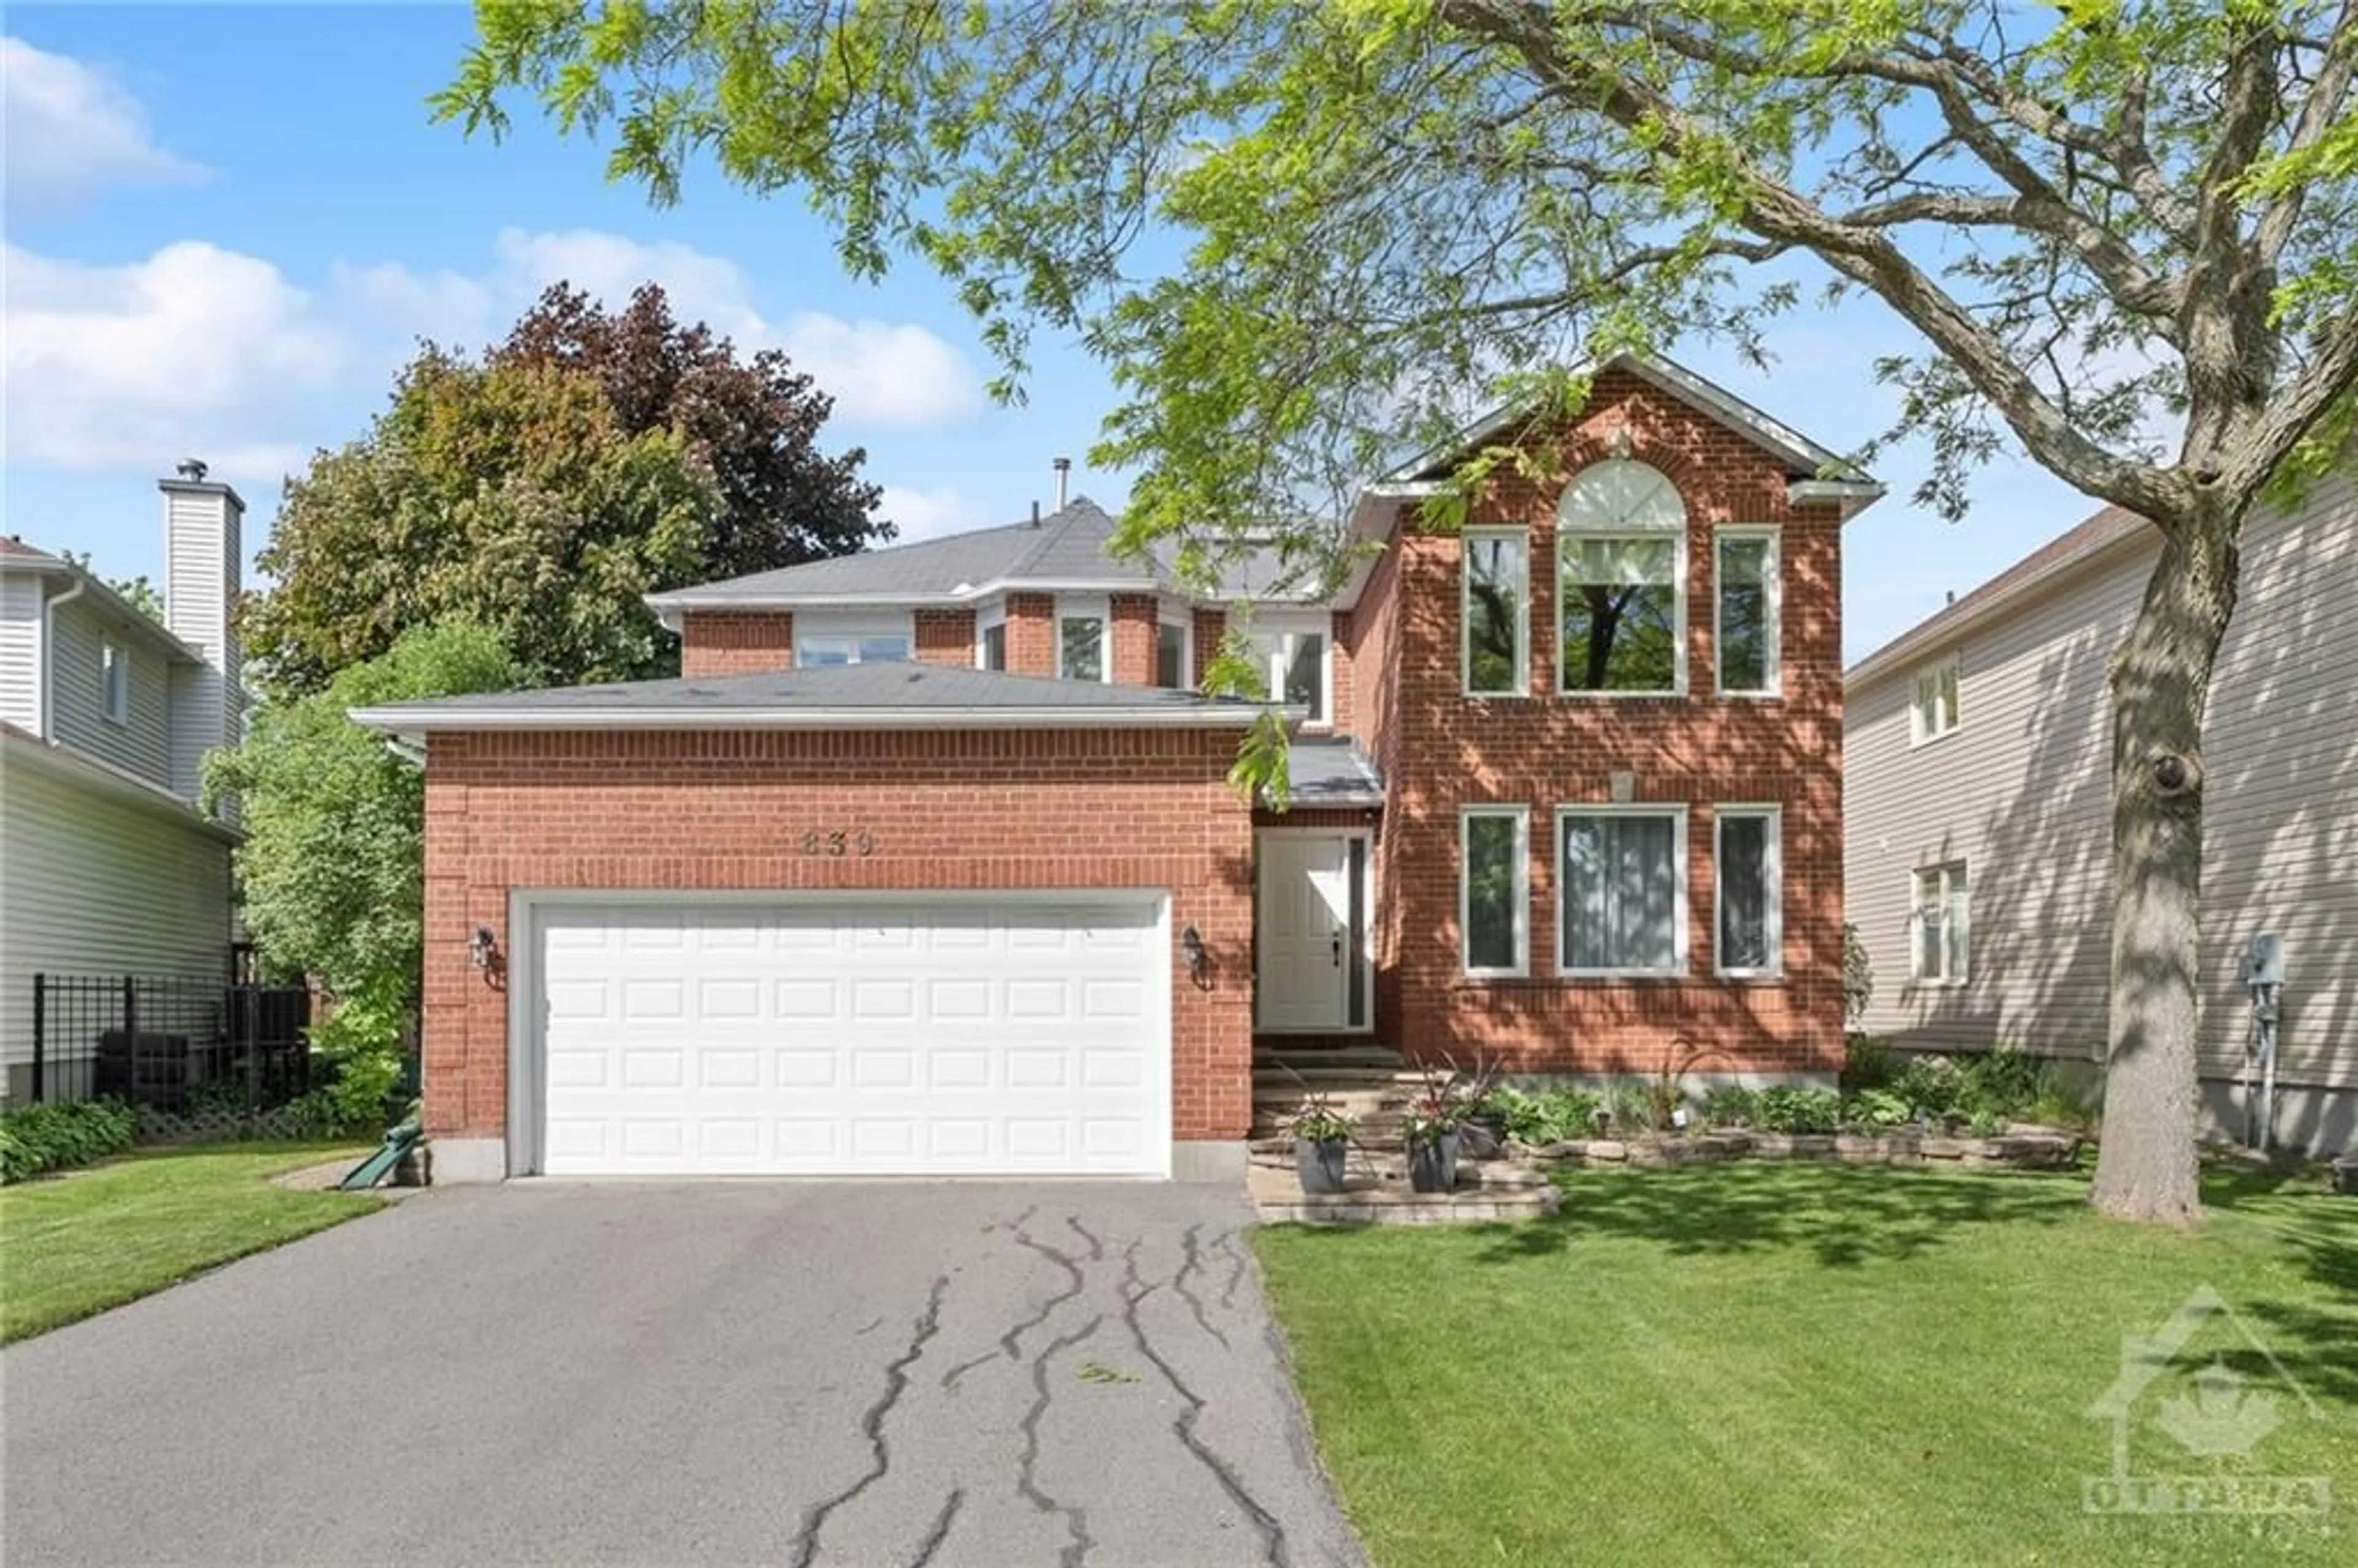 Home with brick exterior material for 839 ADENCLIFFE Dr, Ottawa Ontario K4A 2N1